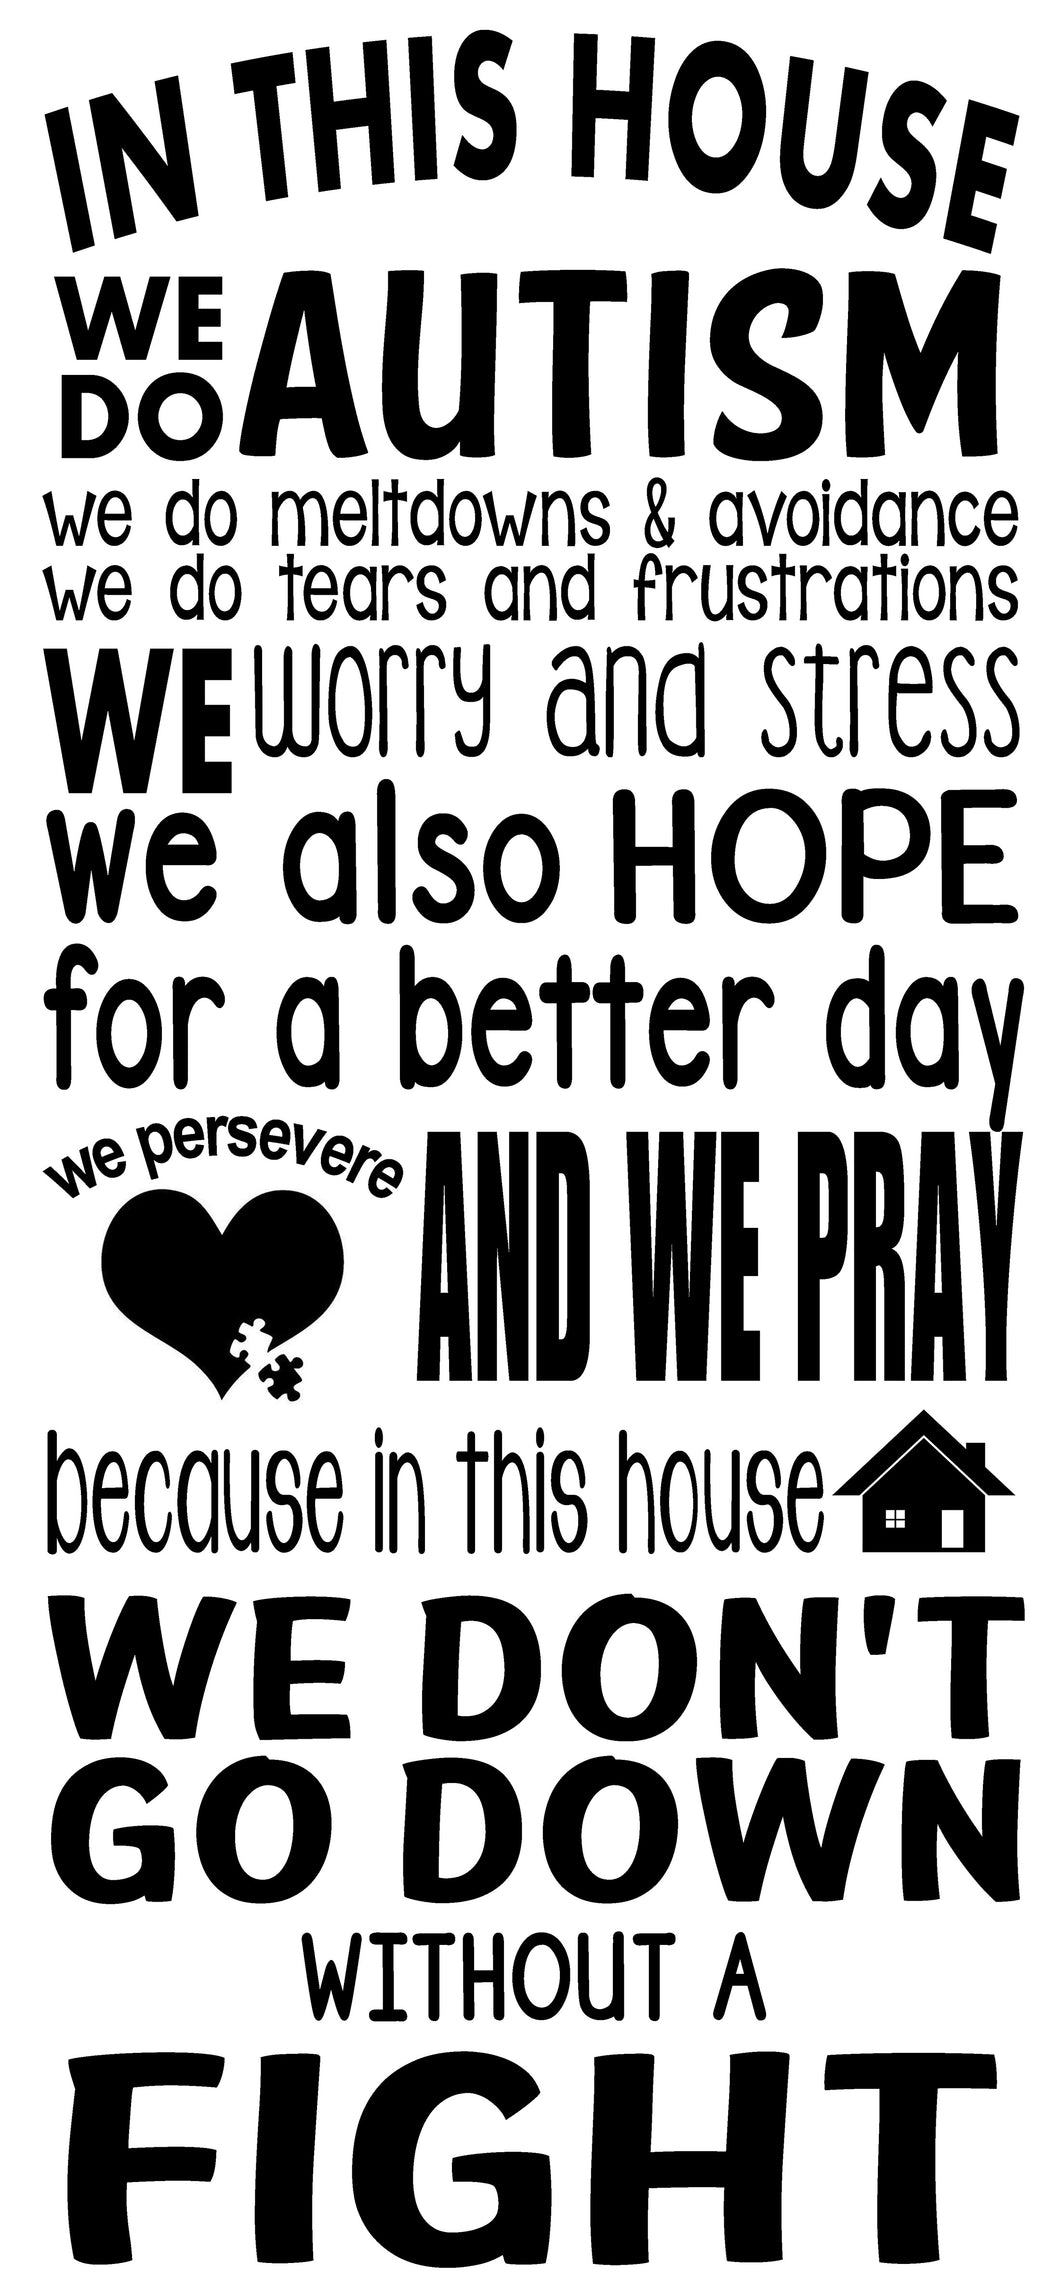 In this House we do Autism... - Hello Sweetness Designs